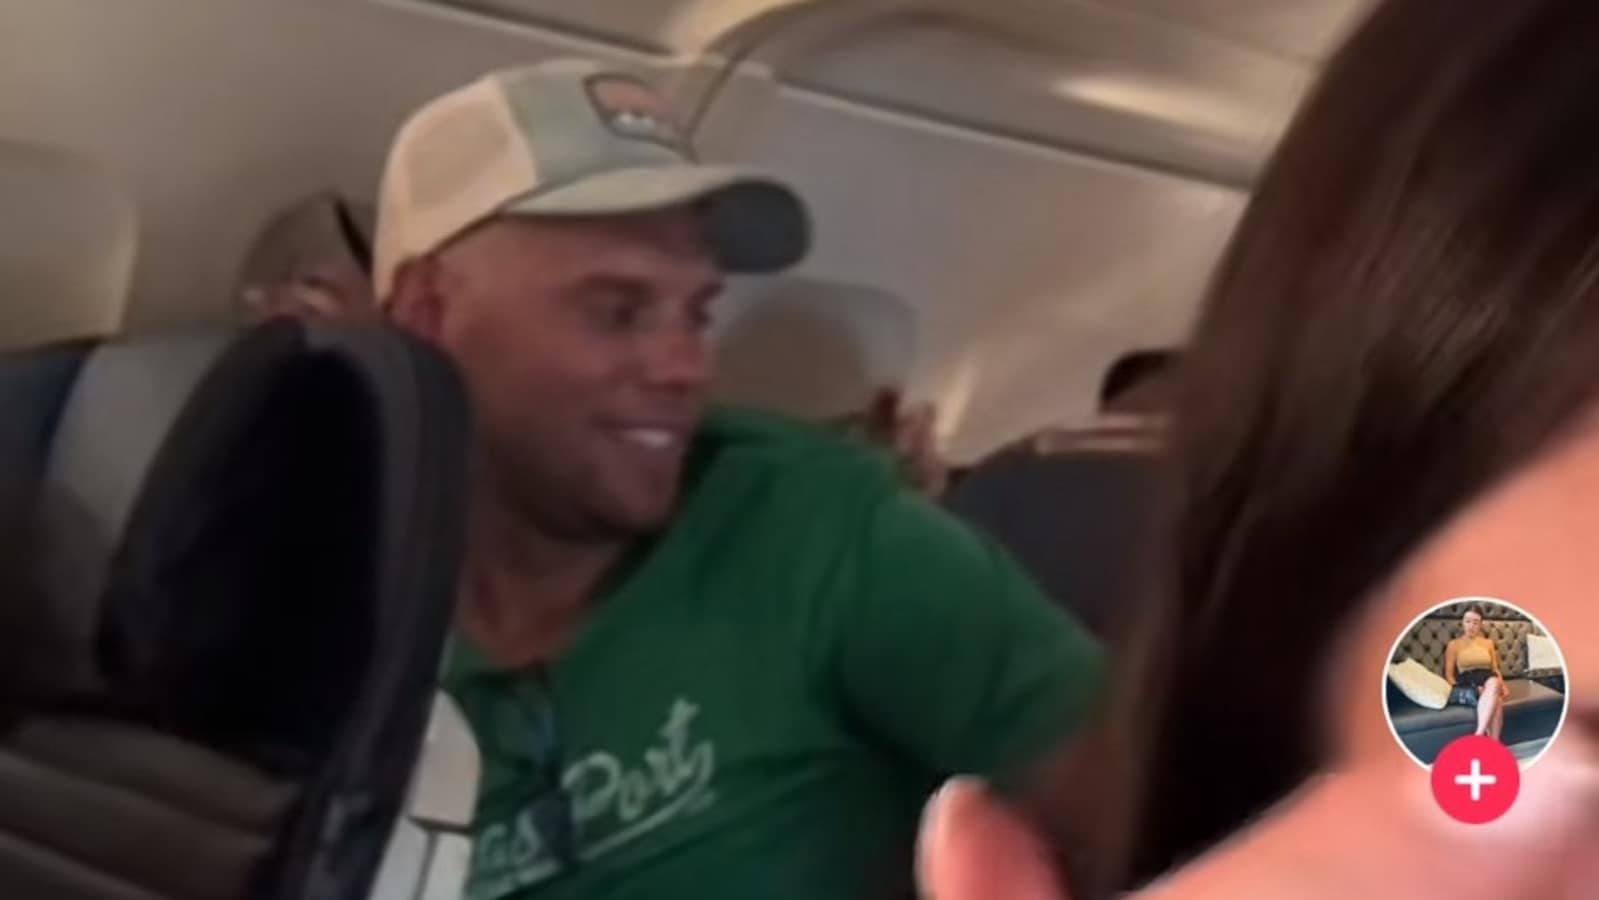 TikToker goes viral after filming a married man cheating on a flight: Watch